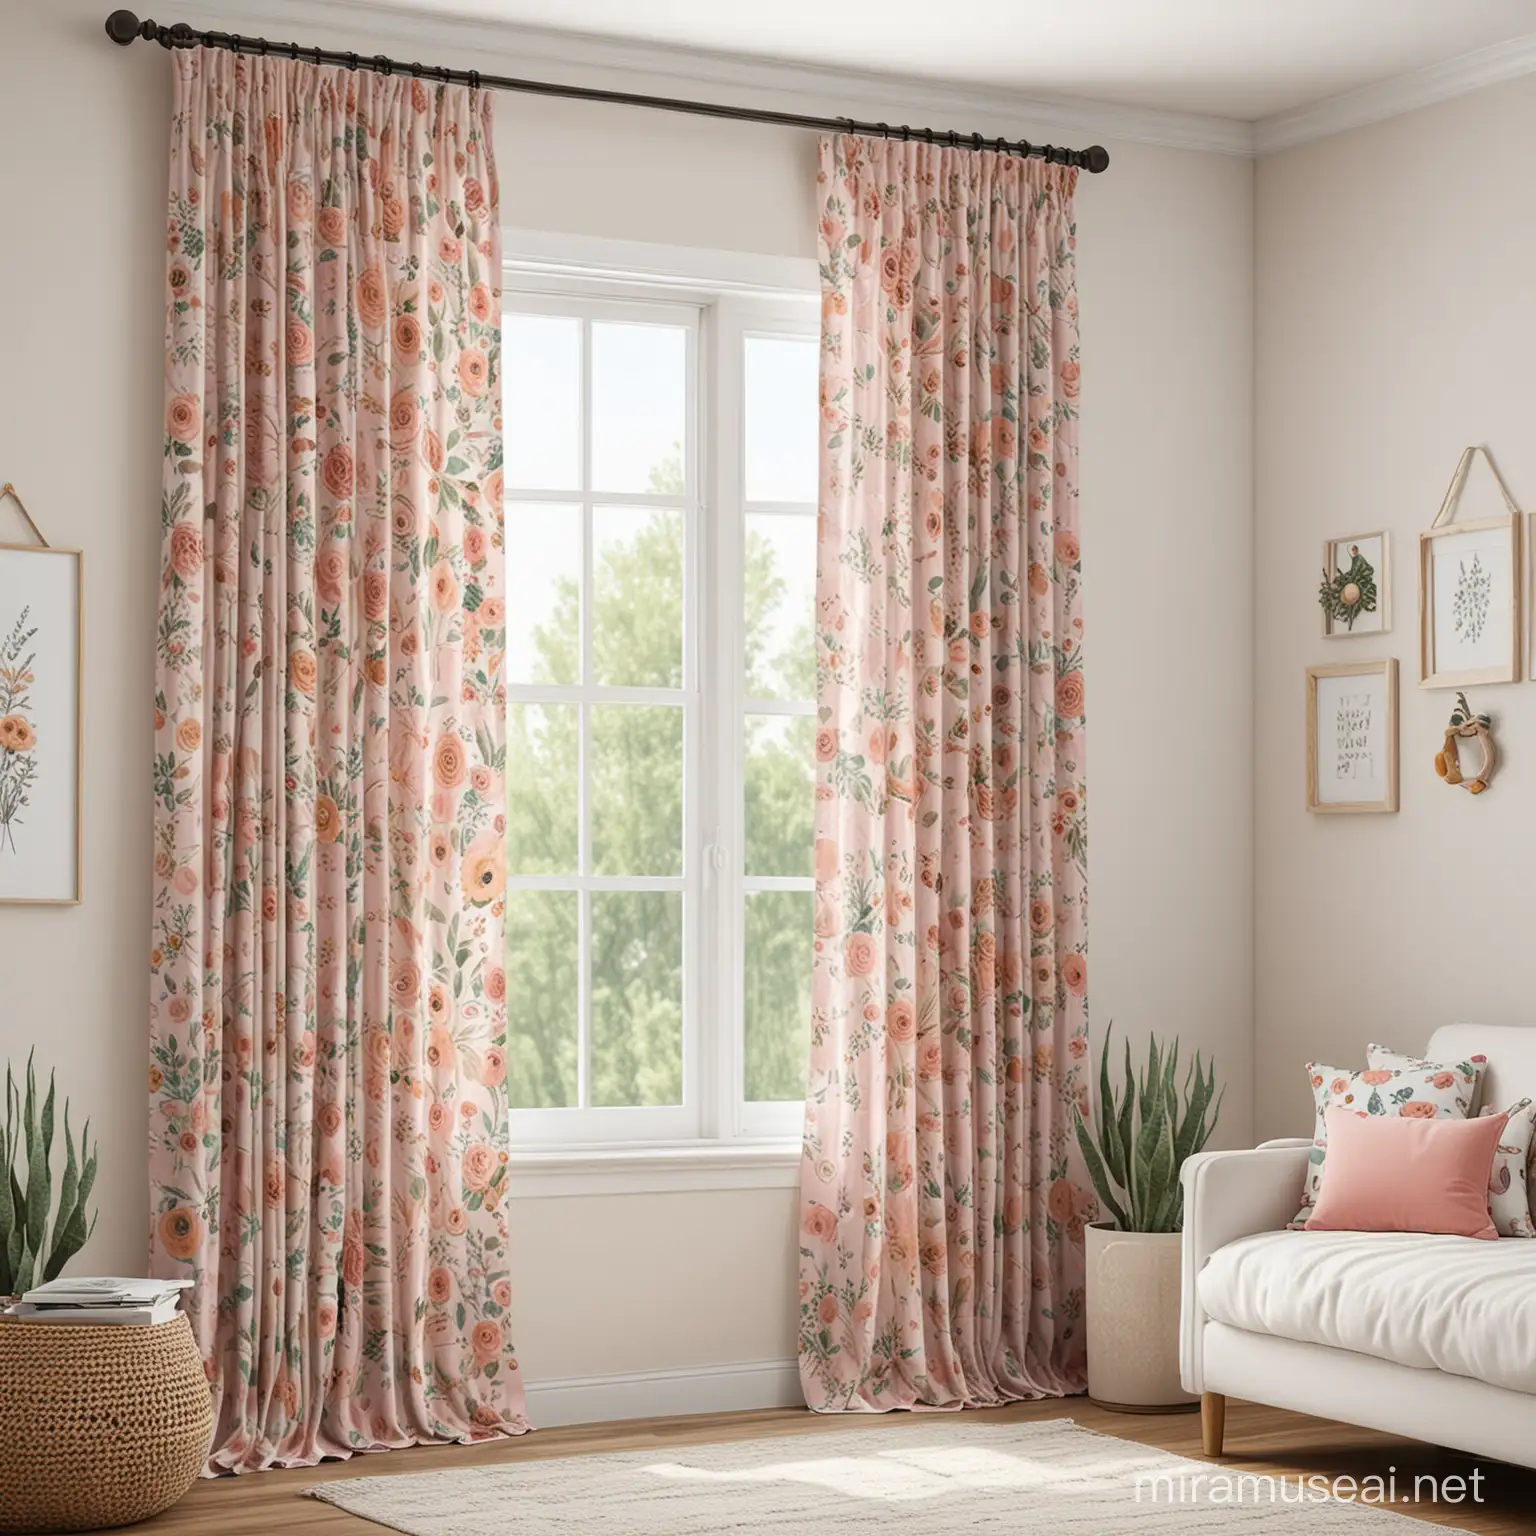 realistic image of a boho style girls nursery full length window curtains for a mockup